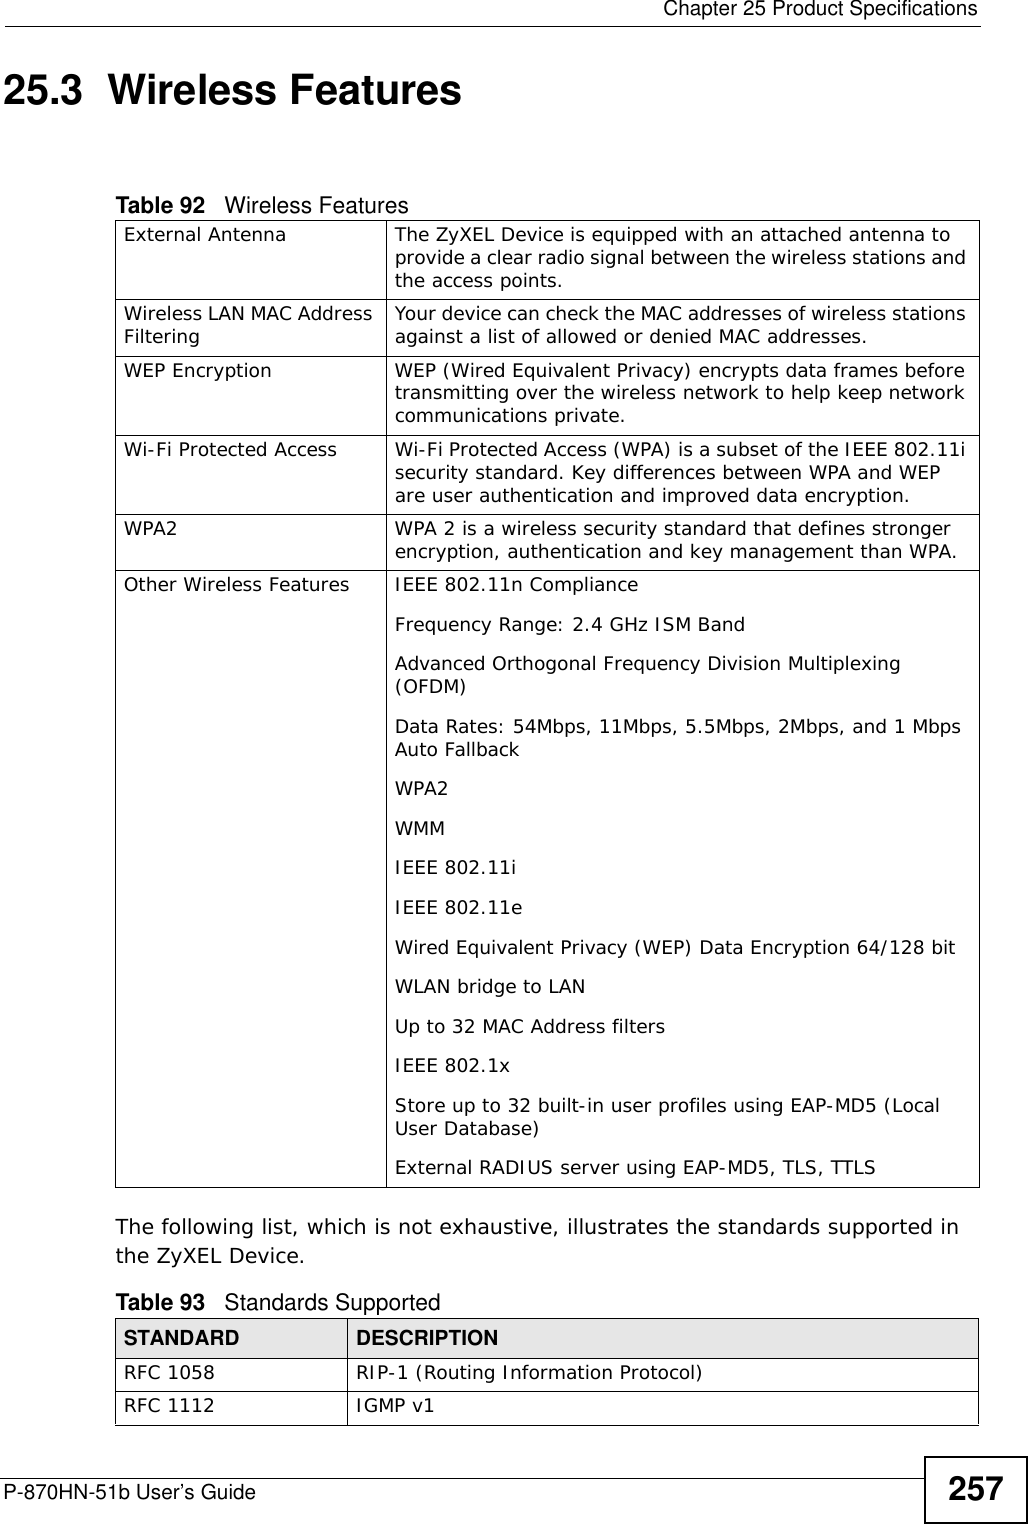  Chapter 25 Product SpecificationsP-870HN-51b User’s Guide 25725.3  Wireless Features The following list, which is not exhaustive, illustrates the standards supported in the ZyXEL Device.Table 92   Wireless FeaturesExternal Antenna  The ZyXEL Device is equipped with an attached antenna to provide a clear radio signal between the wireless stations and the access points.Wireless LAN MAC Address Filtering  Your device can check the MAC addresses of wireless stations against a list of allowed or denied MAC addresses.WEP Encryption WEP (Wired Equivalent Privacy) encrypts data frames before transmitting over the wireless network to help keep network communications private.Wi-Fi Protected Access  Wi-Fi Protected Access (WPA) is a subset of the IEEE 802.11i security standard. Key differences between WPA and WEP are user authentication and improved data encryption.WPA2  WPA 2 is a wireless security standard that defines stronger encryption, authentication and key management than WPA.Other Wireless Features IEEE 802.11n ComplianceFrequency Range: 2.4 GHz ISM BandAdvanced Orthogonal Frequency Division Multiplexing (OFDM)Data Rates: 54Mbps, 11Mbps, 5.5Mbps, 2Mbps, and 1 Mbps Auto FallbackWPA2WMM IEEE 802.11iIEEE 802.11eWired Equivalent Privacy (WEP) Data Encryption 64/128 bitWLAN bridge to LANUp to 32 MAC Address filtersIEEE 802.1xStore up to 32 built-in user profiles using EAP-MD5 (Local User Database)External RADIUS server using EAP-MD5, TLS, TTLSTable 93   Standards Supported STANDARD DESCRIPTIONRFC 1058 RIP-1 (Routing Information Protocol)RFC 1112 IGMP v1